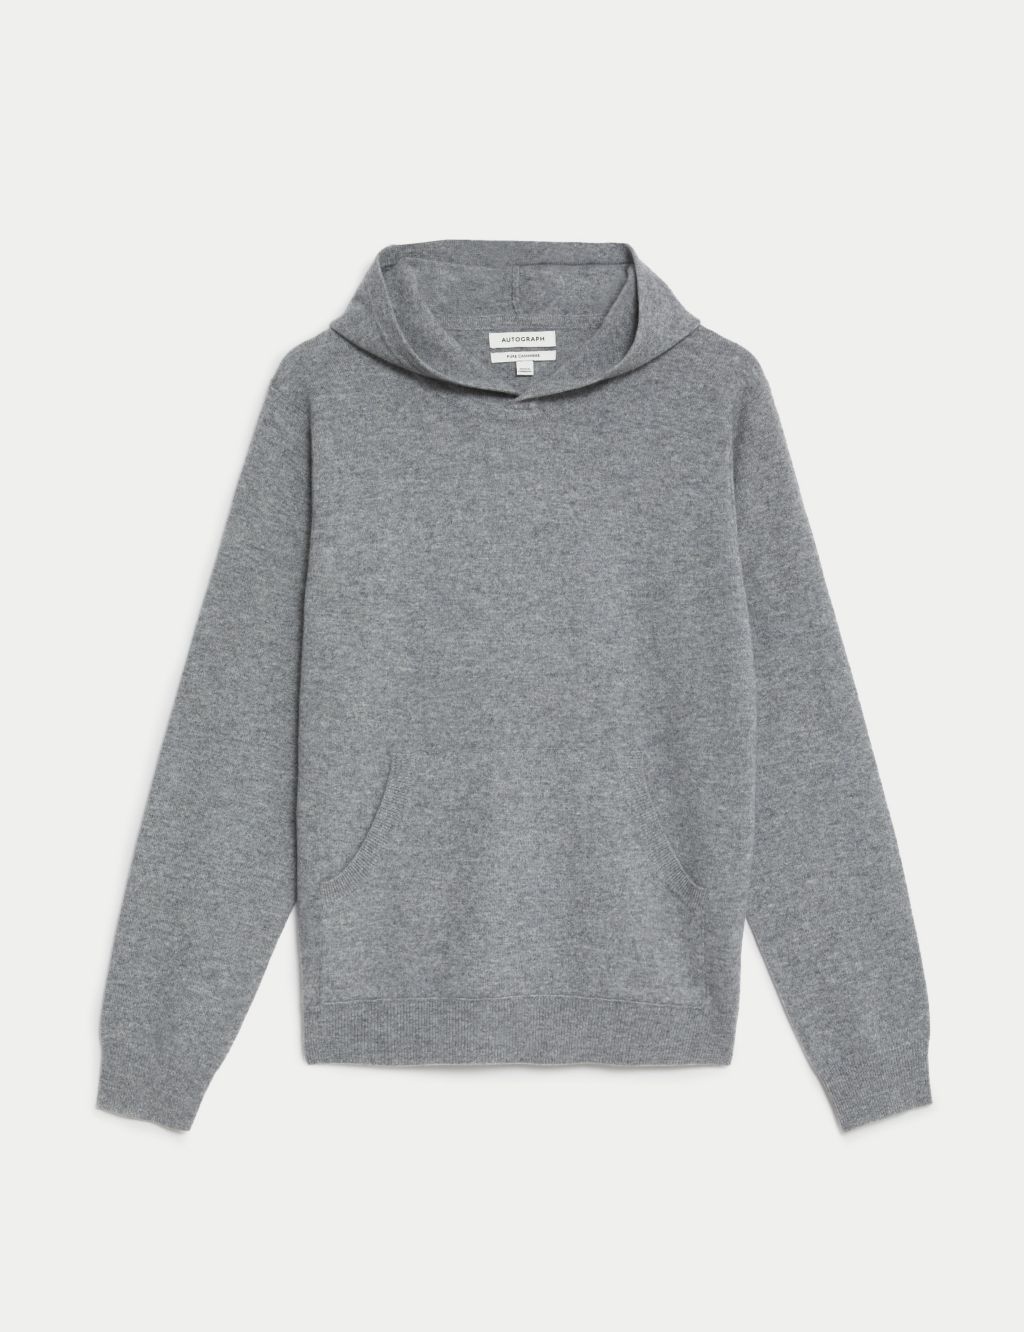 Pure Cashmere Knitted Hoodie image 1